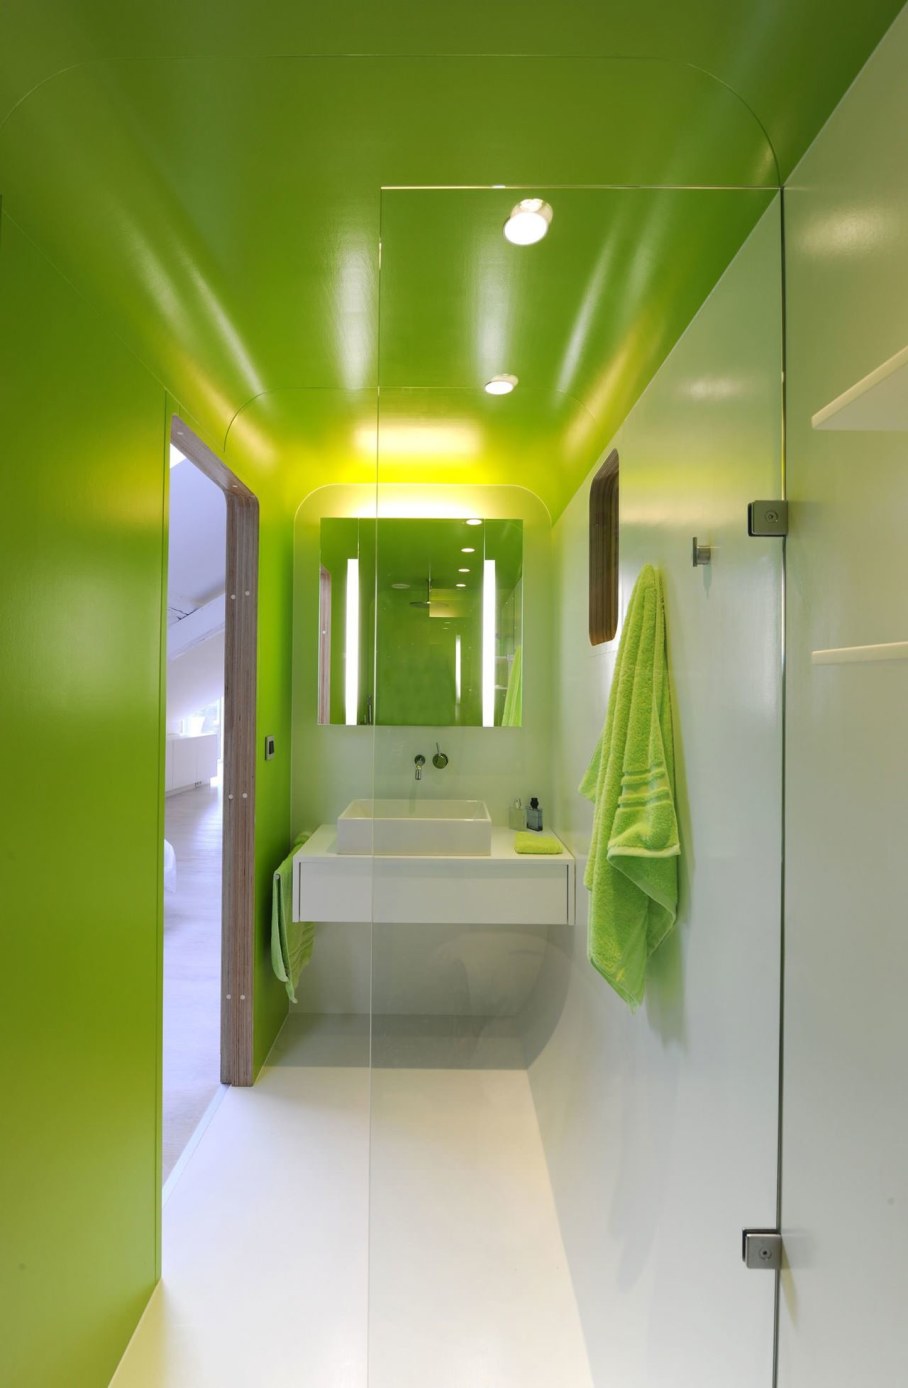 Creative Apartment Design from Dethier Architectures - Green Bathroom